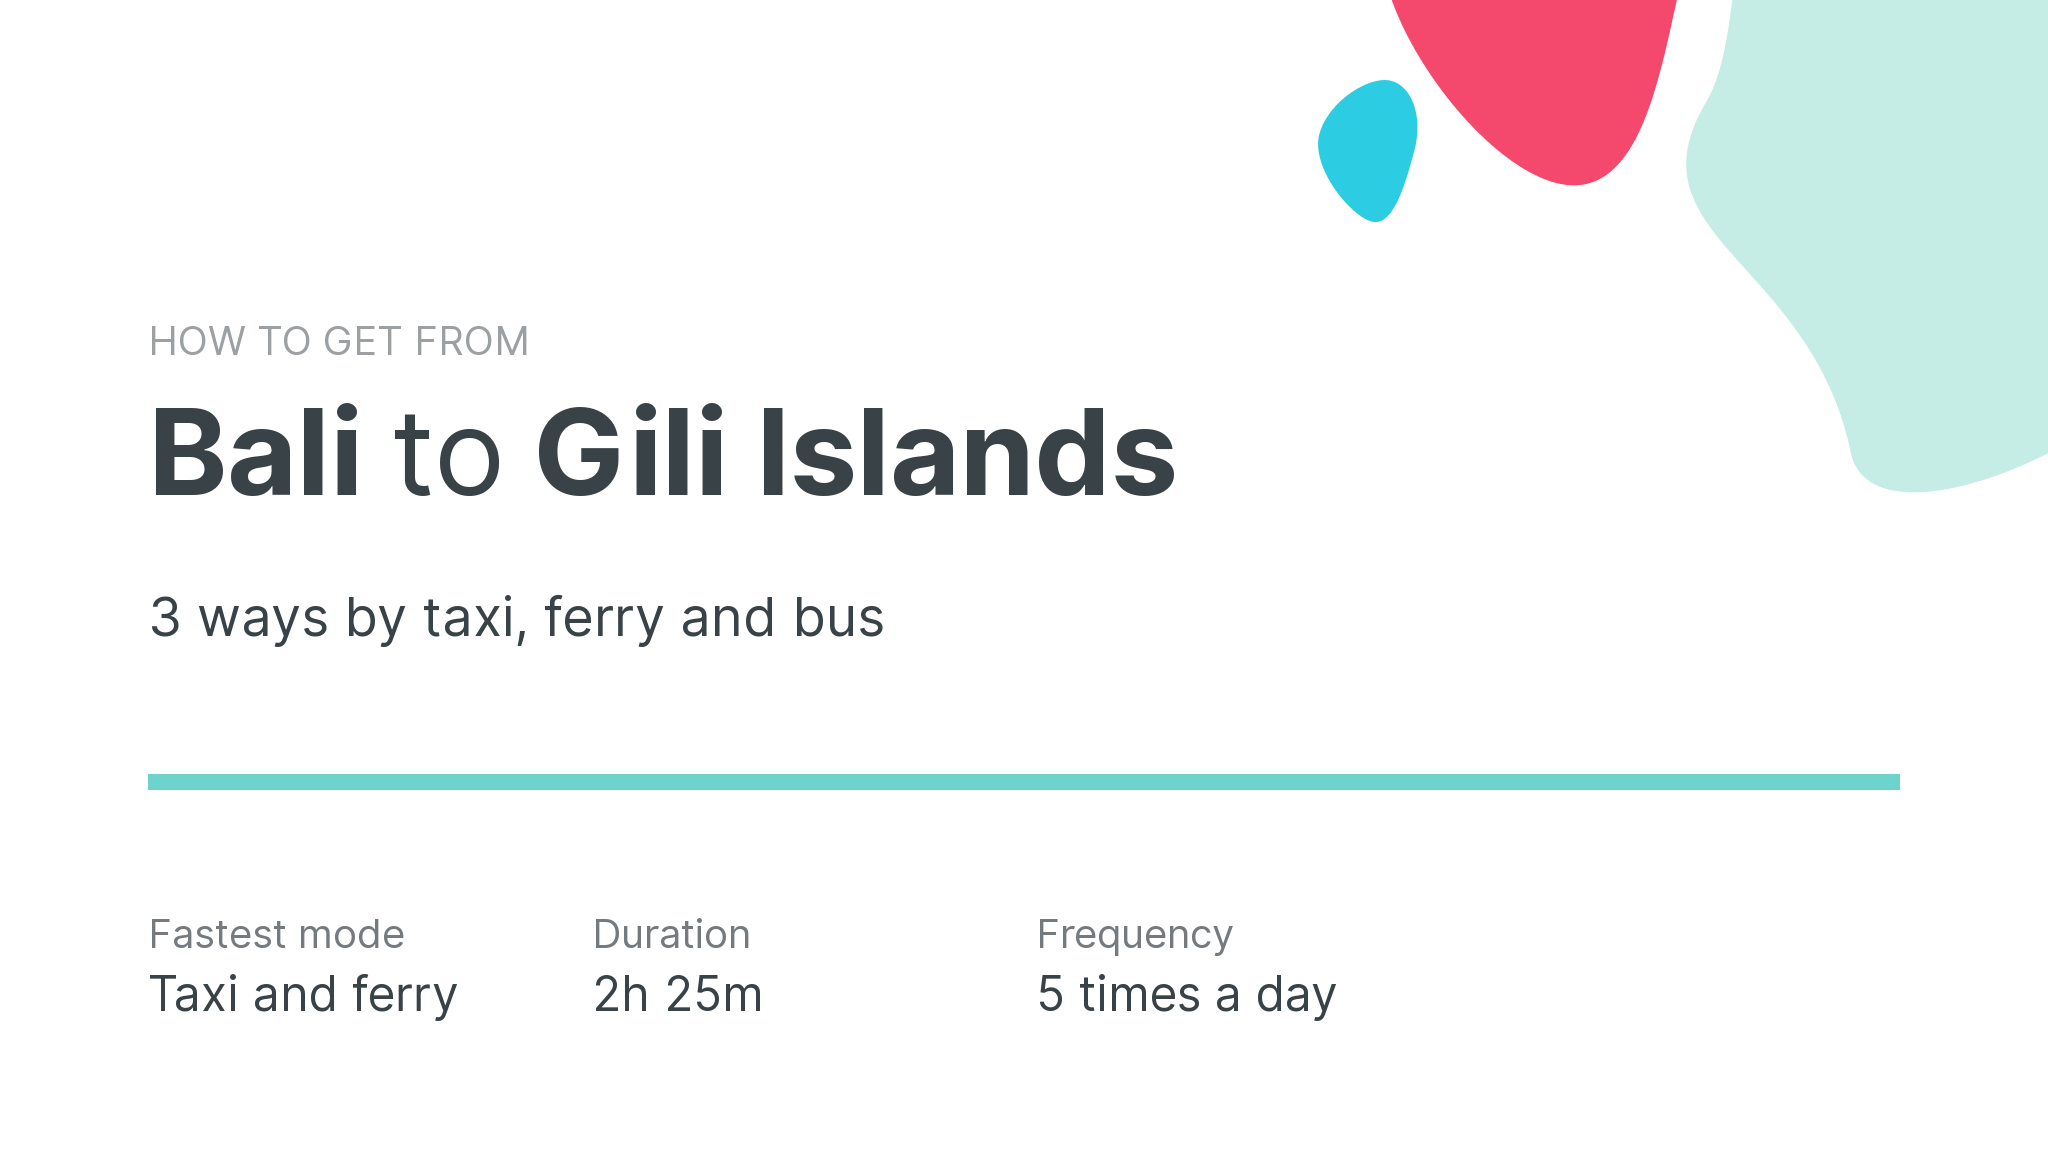 How do I get from Bali to Gili Islands